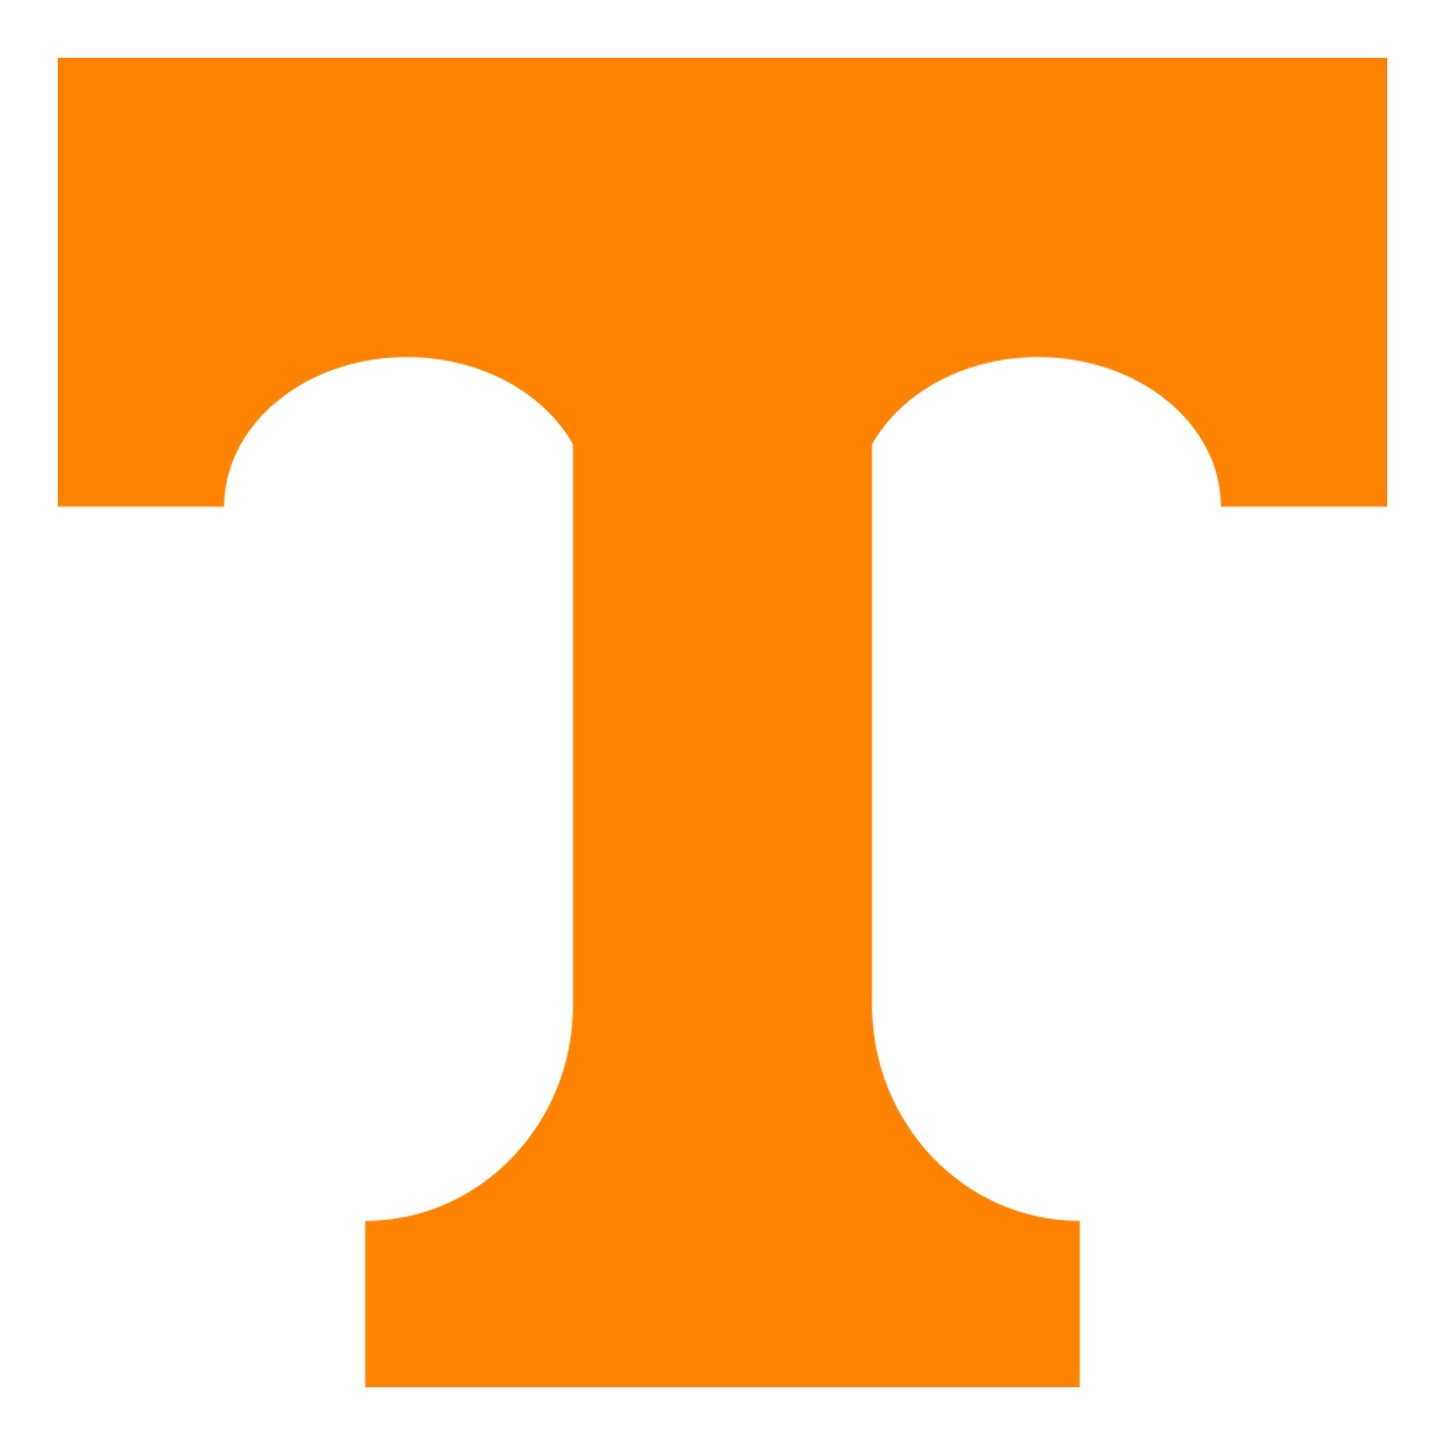 Sheet of 5 -U of Tennessee: Tennessee Volunteers  Logo Minis        - Officially Licensed NCAA Removable    Adhesive Decal